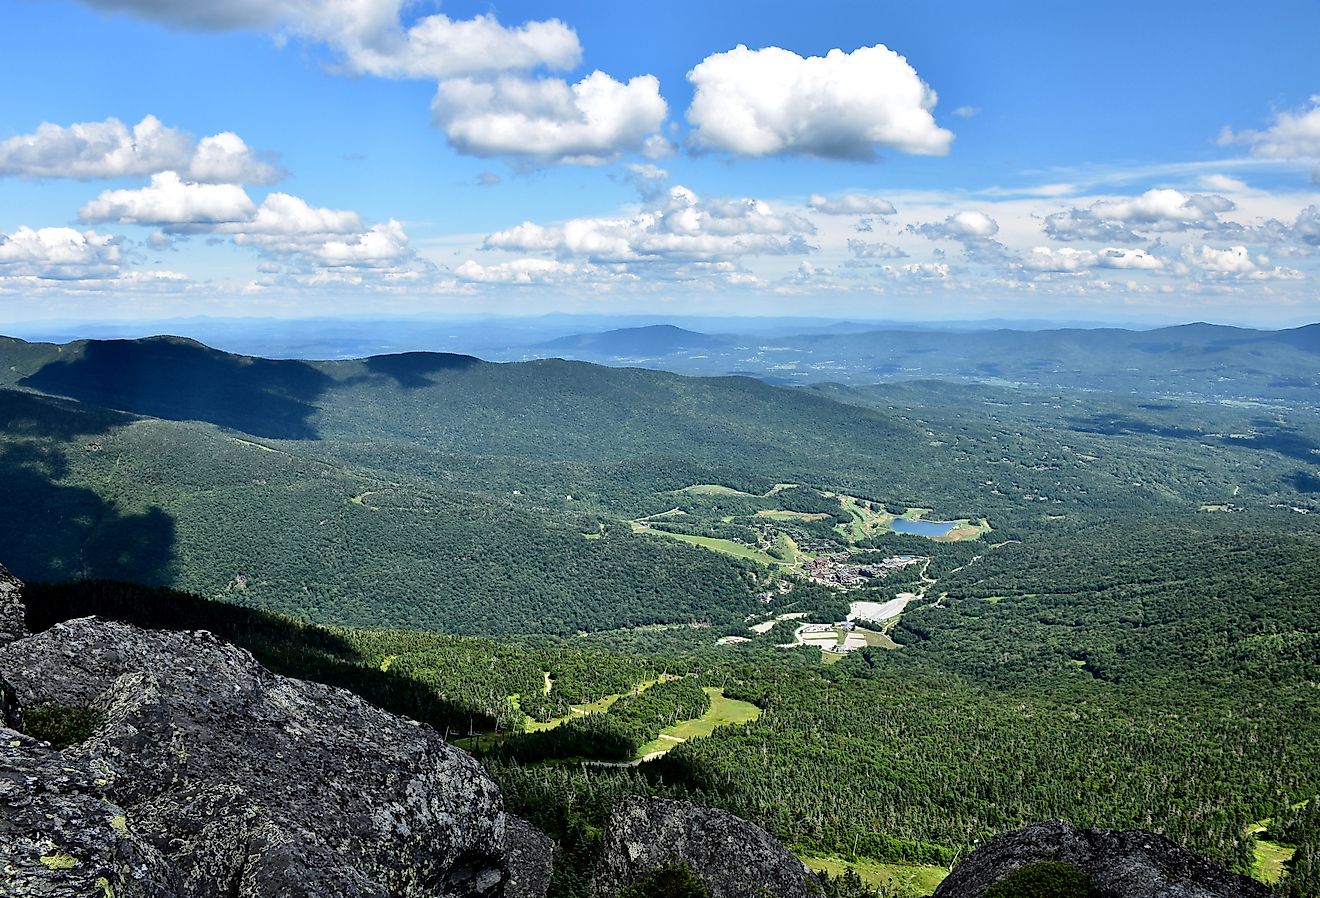 Scenic mountain views while hiking the Long Trail in Stowe, Vermont in summer. Image credit Monika Salvan via Shutterstock.